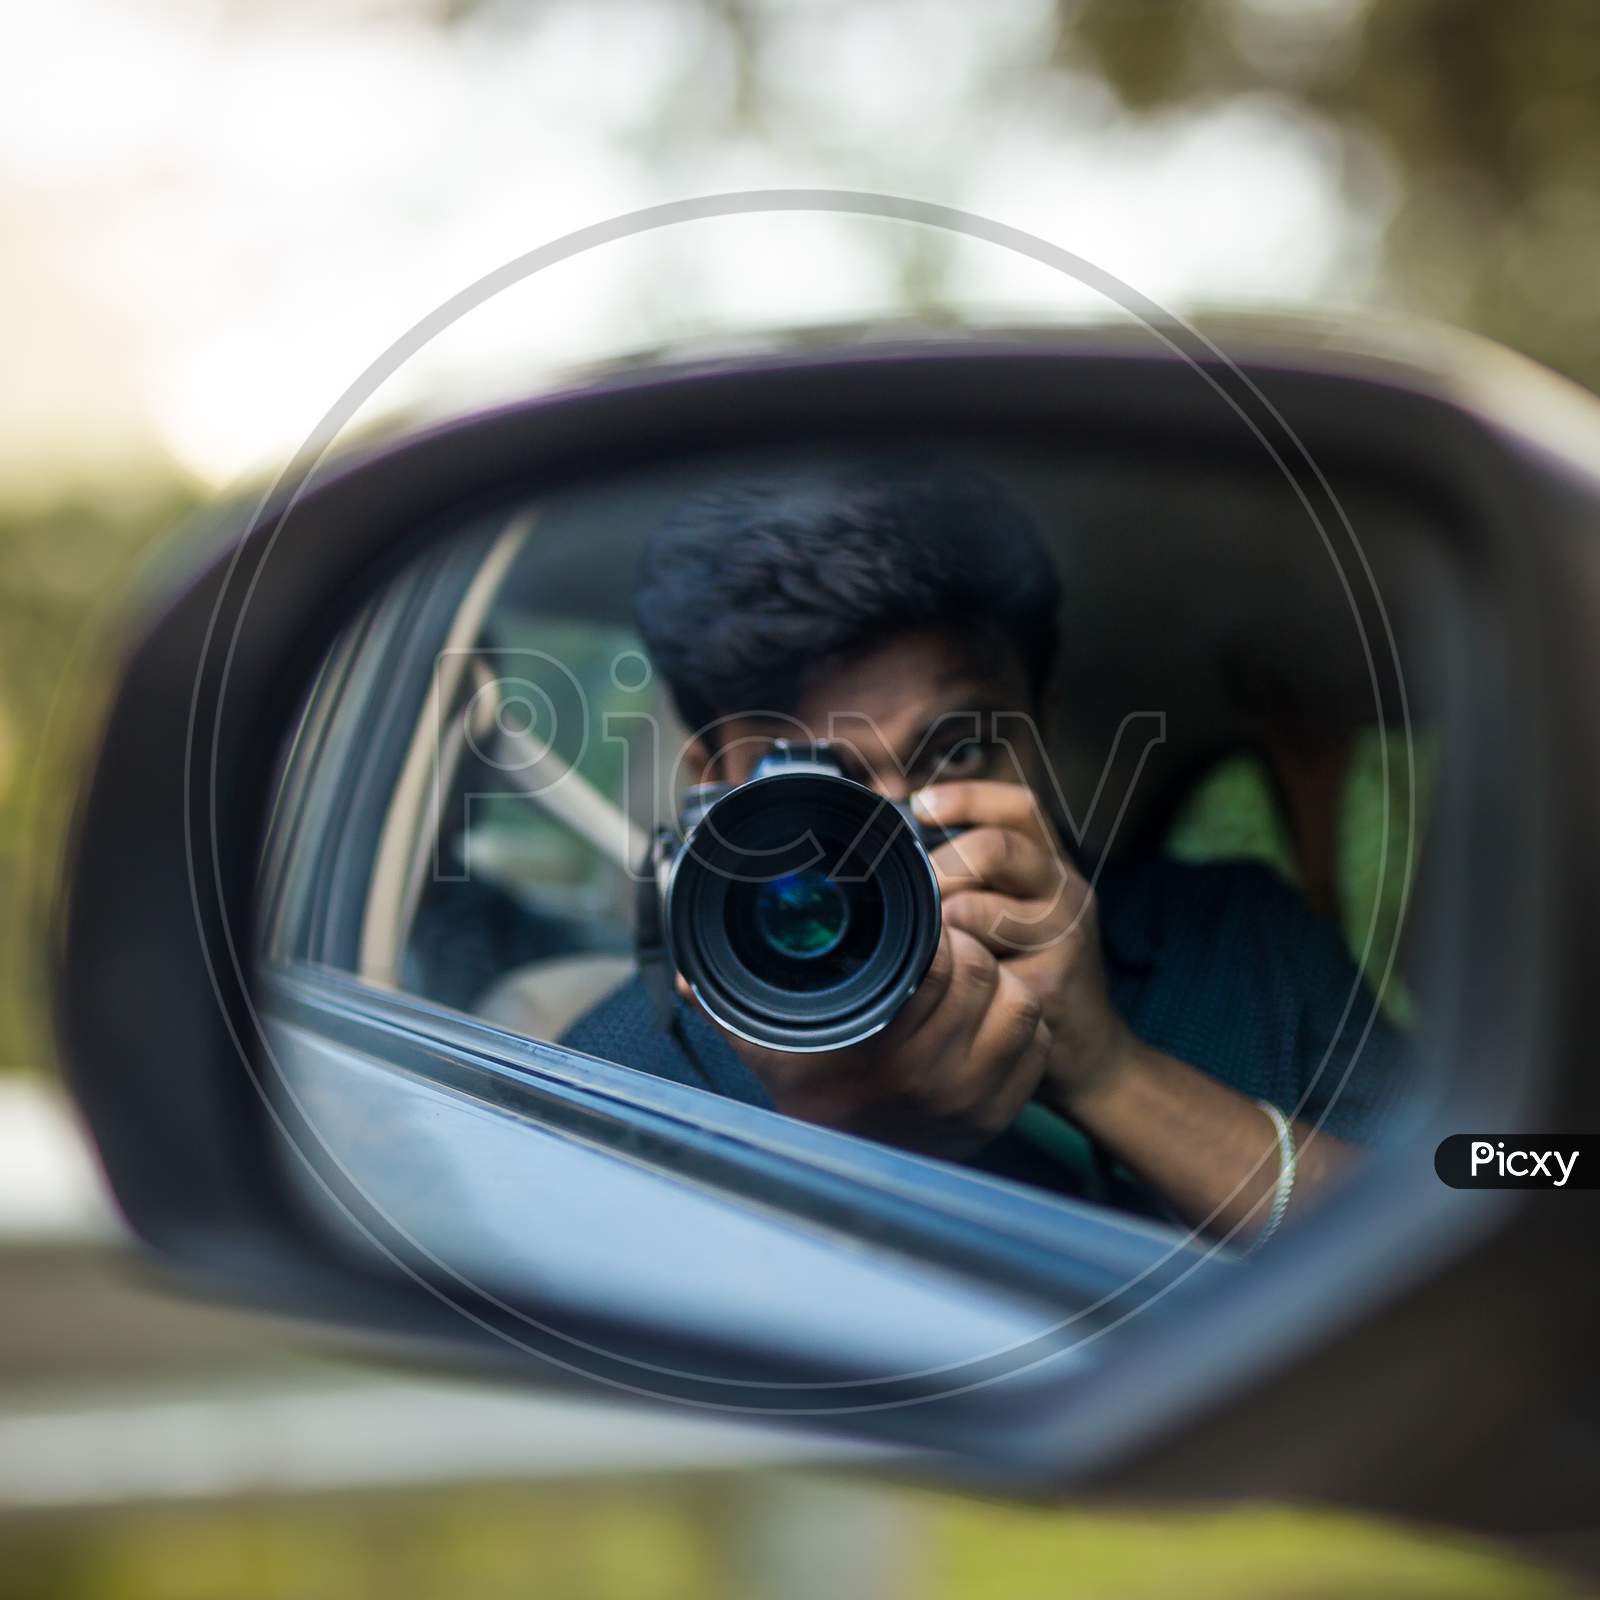 Photographer refection - rear view mirror